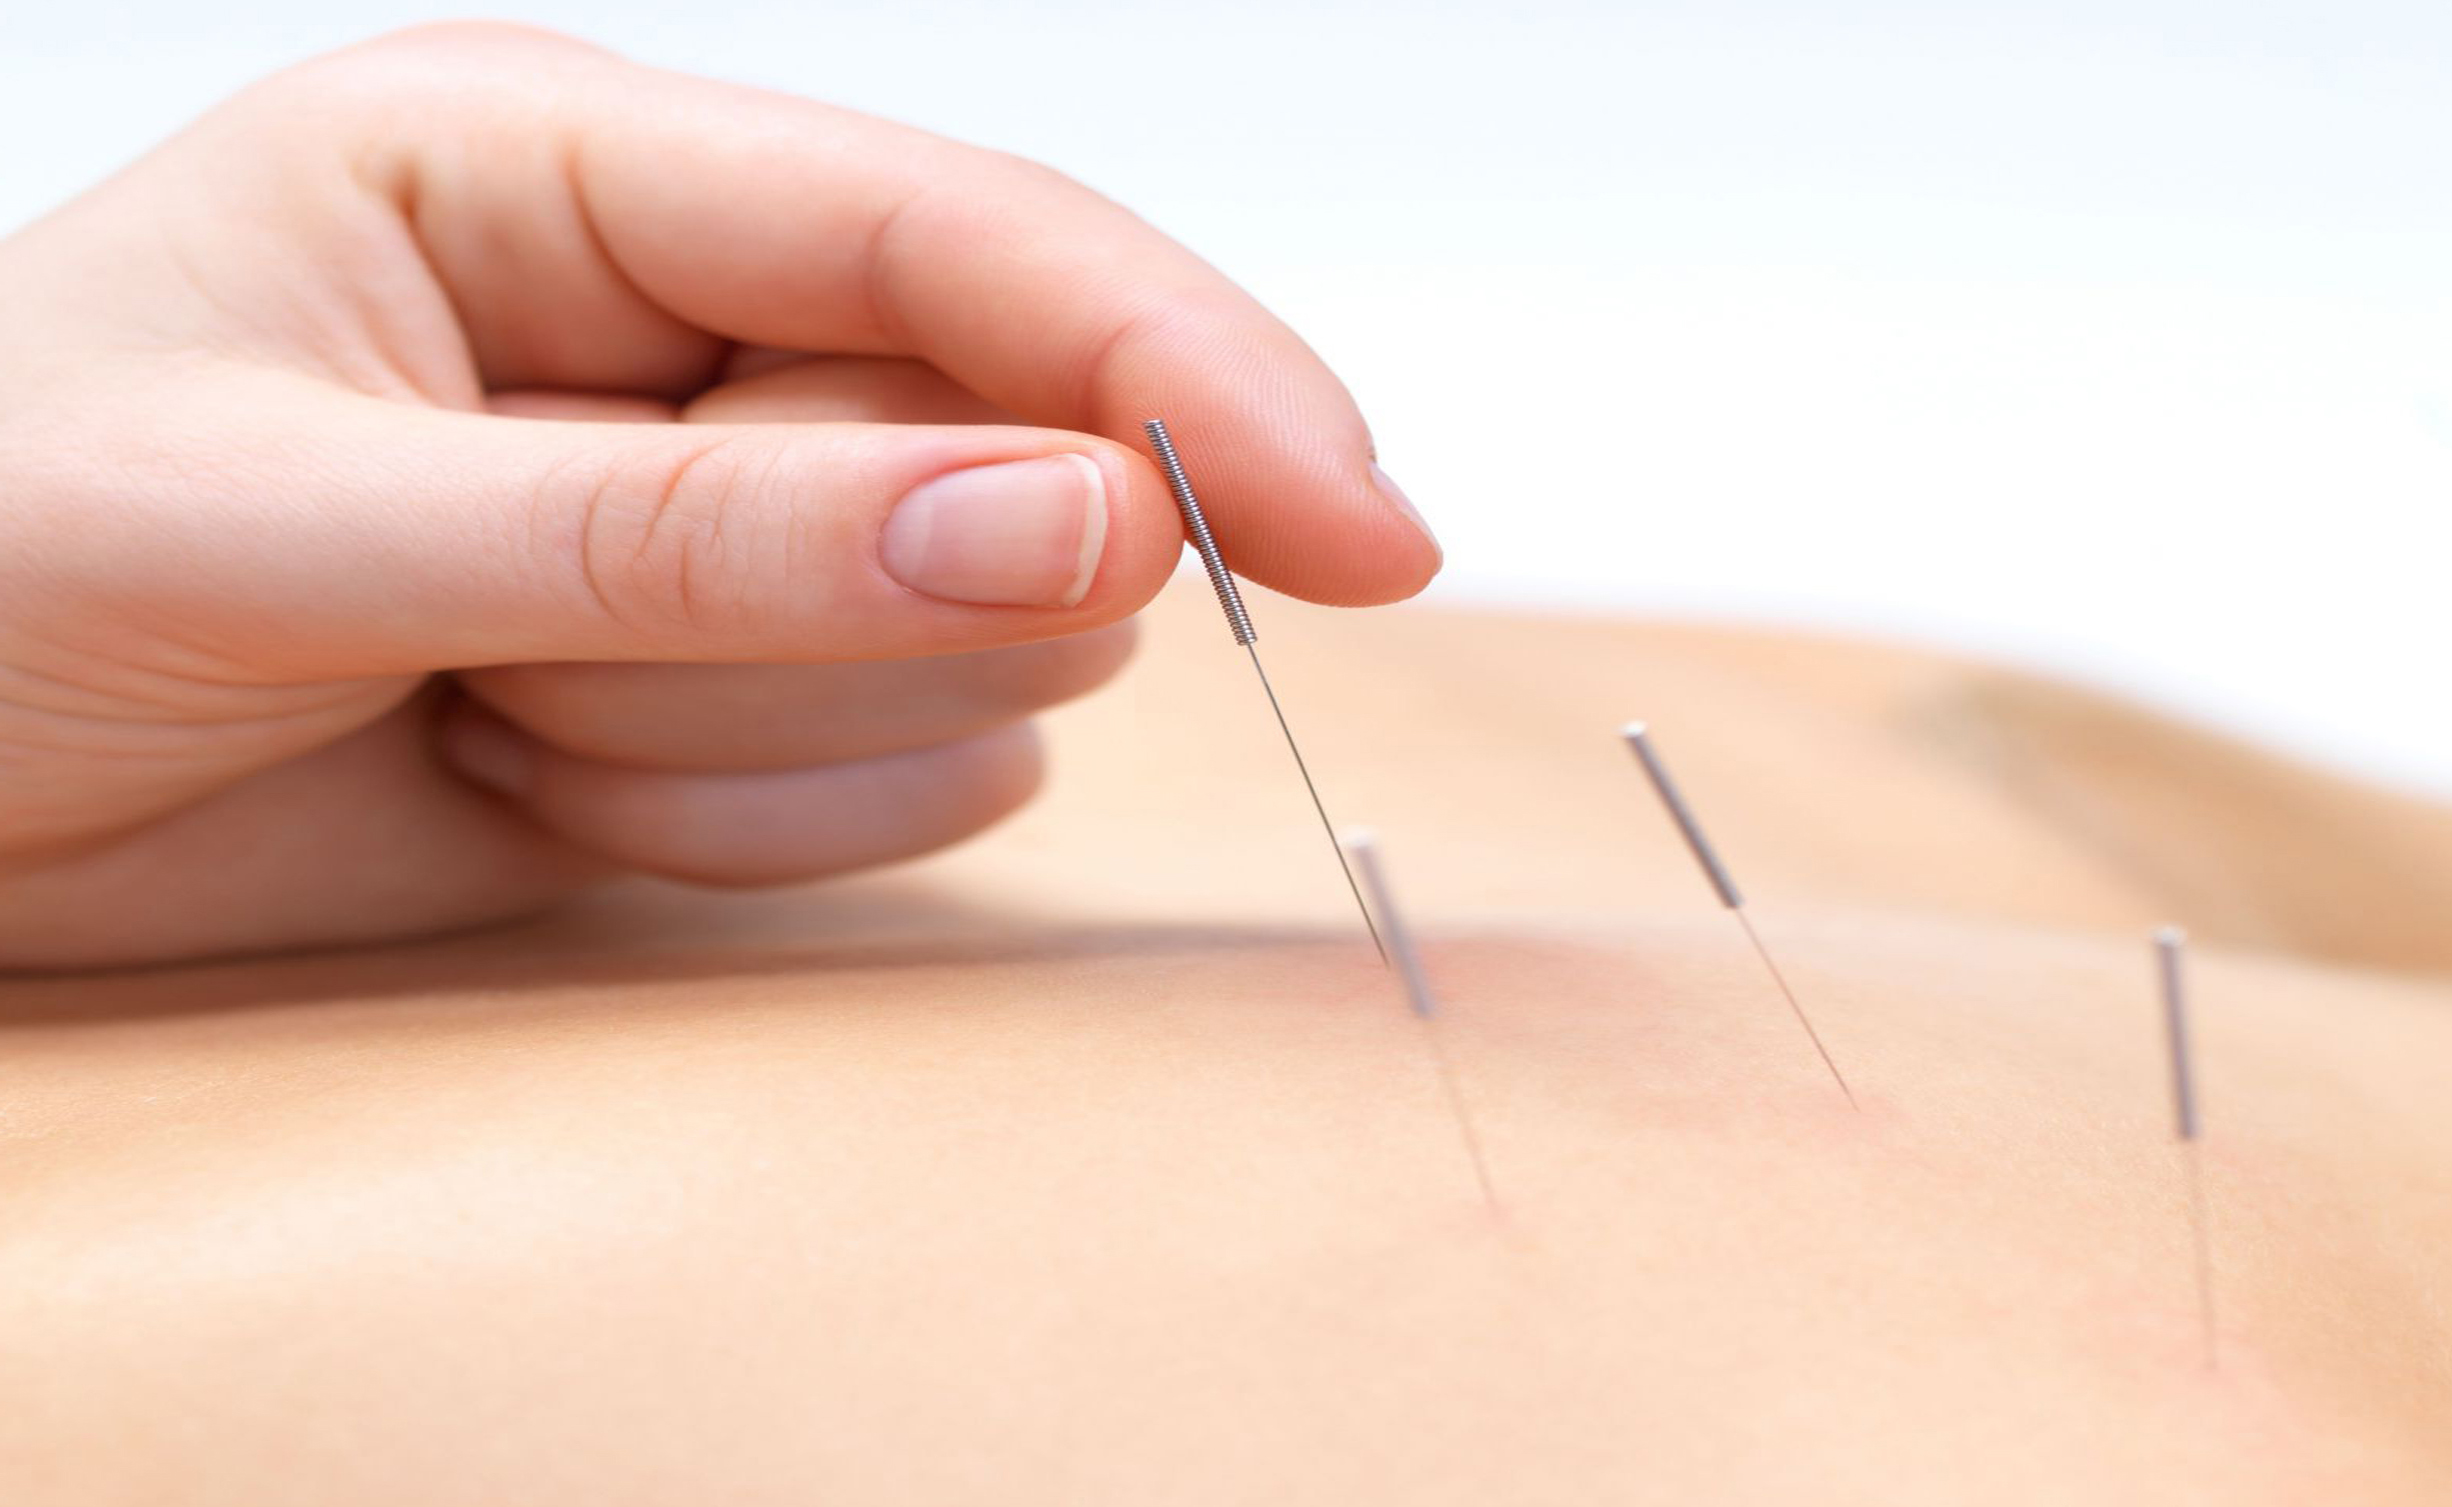 FDA Proposes That Doctors Learn About Acupuncture for Pain 